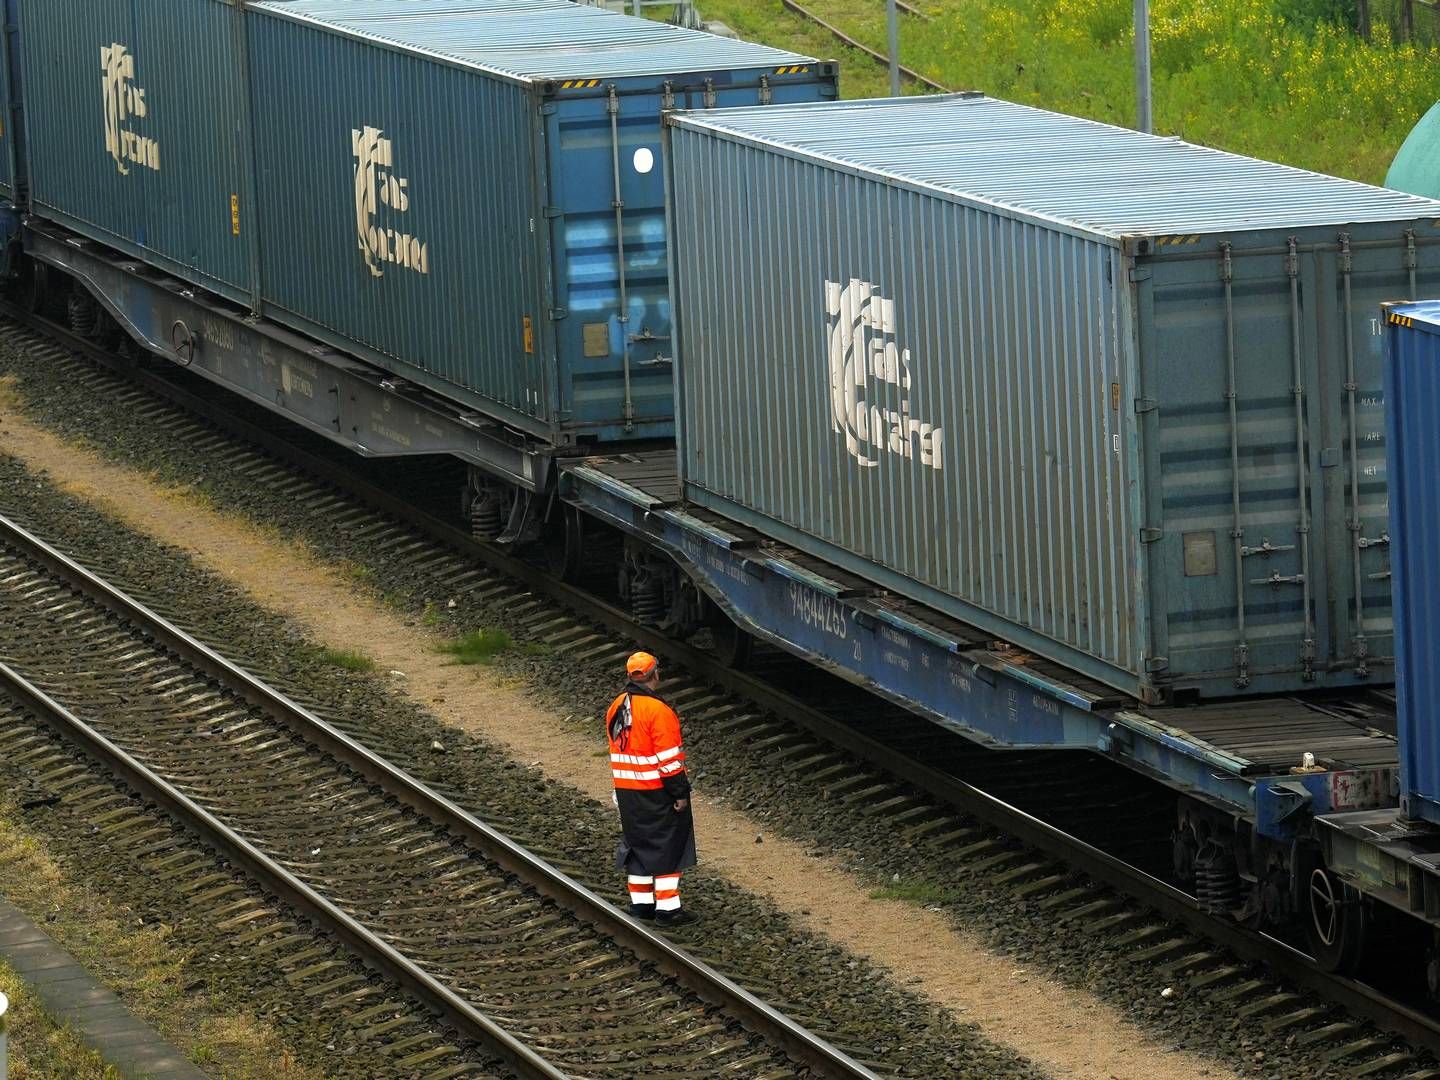 The freight route from China to Europe with transit in Russia became popular during the pandemic, which caused major delays for sea freight. After Russia's full-scale invasion of Ukraine in February 2022, most major Danish carriers decided to call it quits. | Foto: Ints Kalnins/Reuters/Ritzau Scanpix